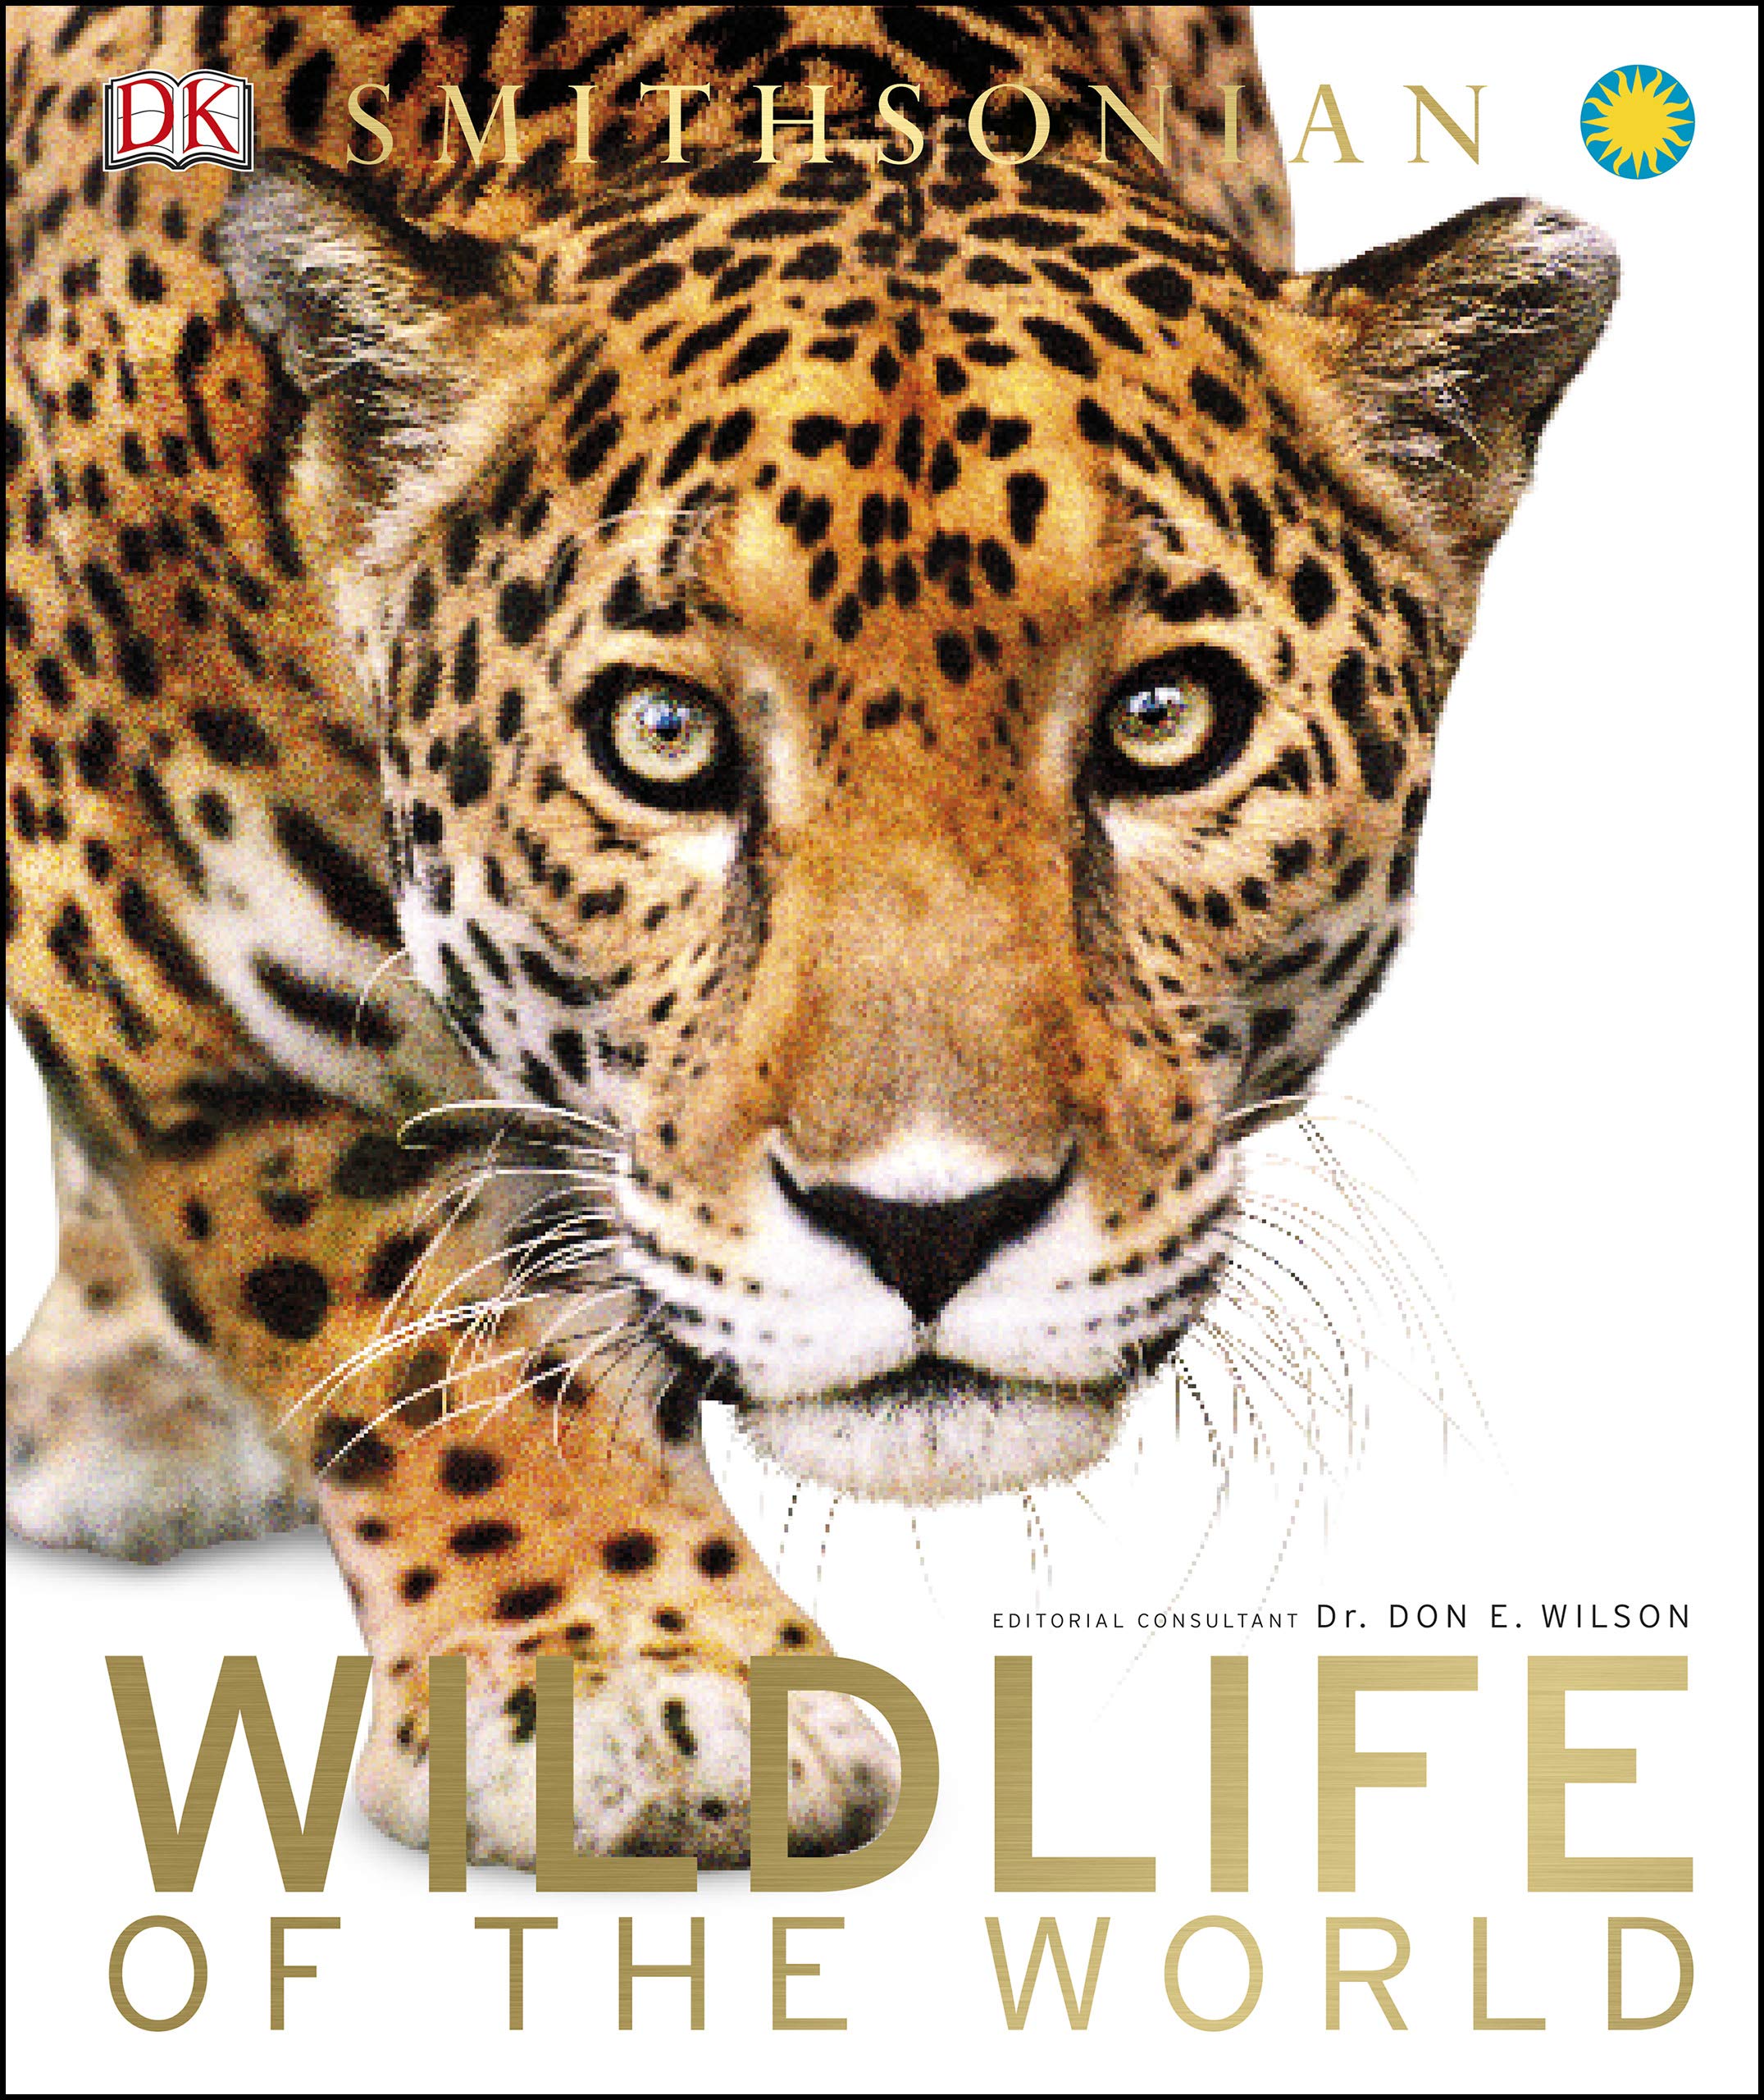 Wildlife of the World (DK Wonders of the World) (eBook) by DK $1.99